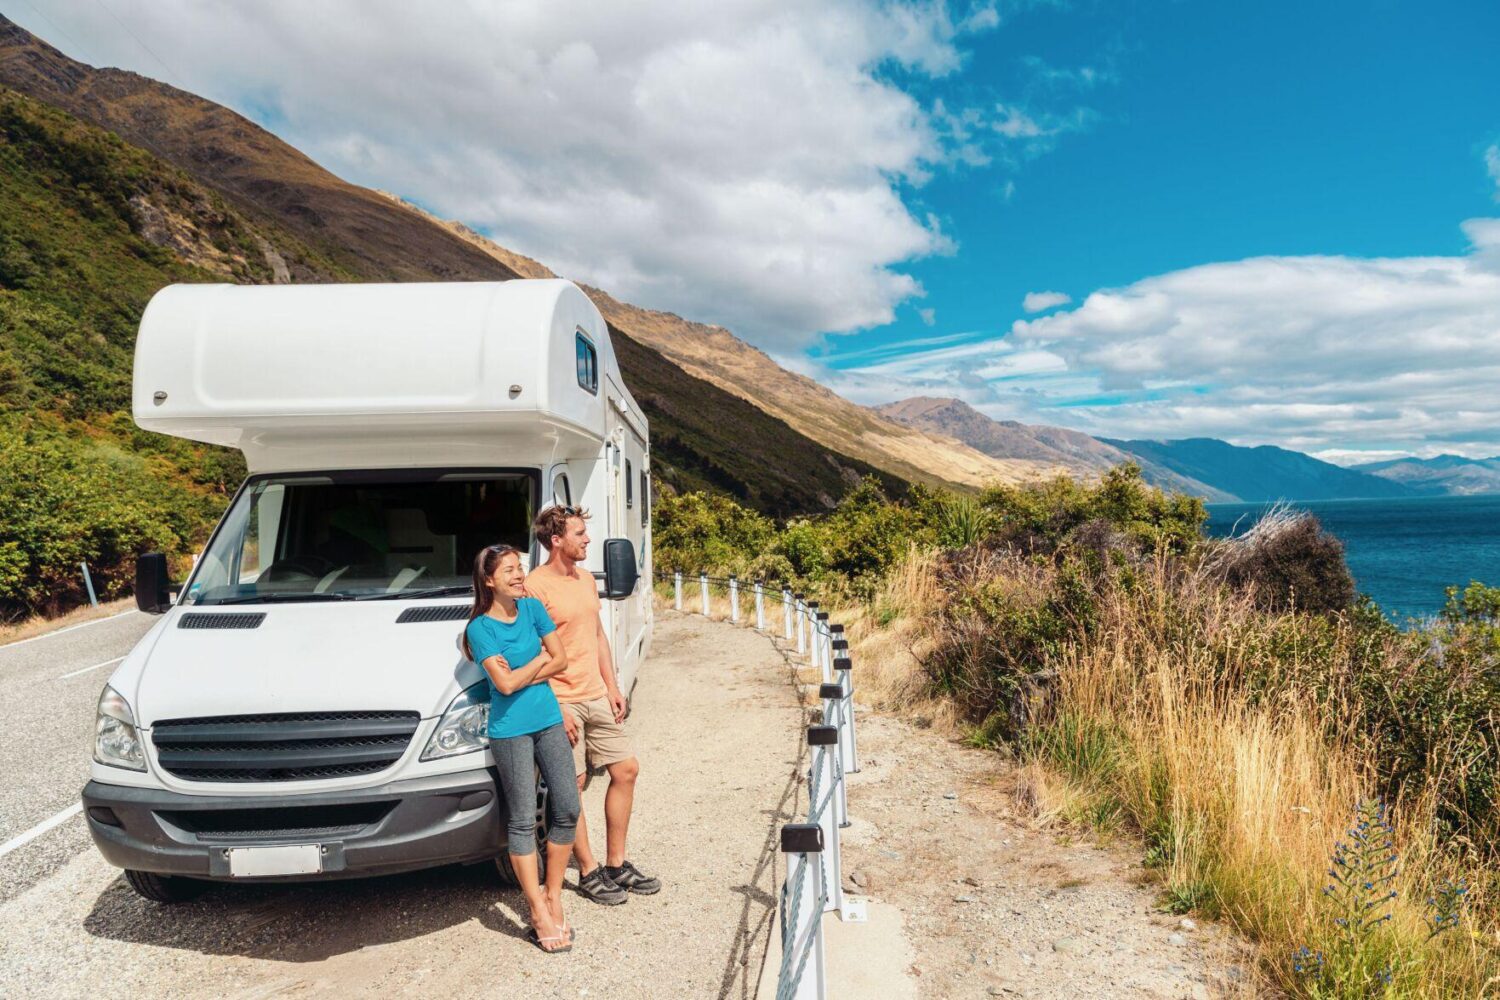 Man and woman in front of RV admiring landscape